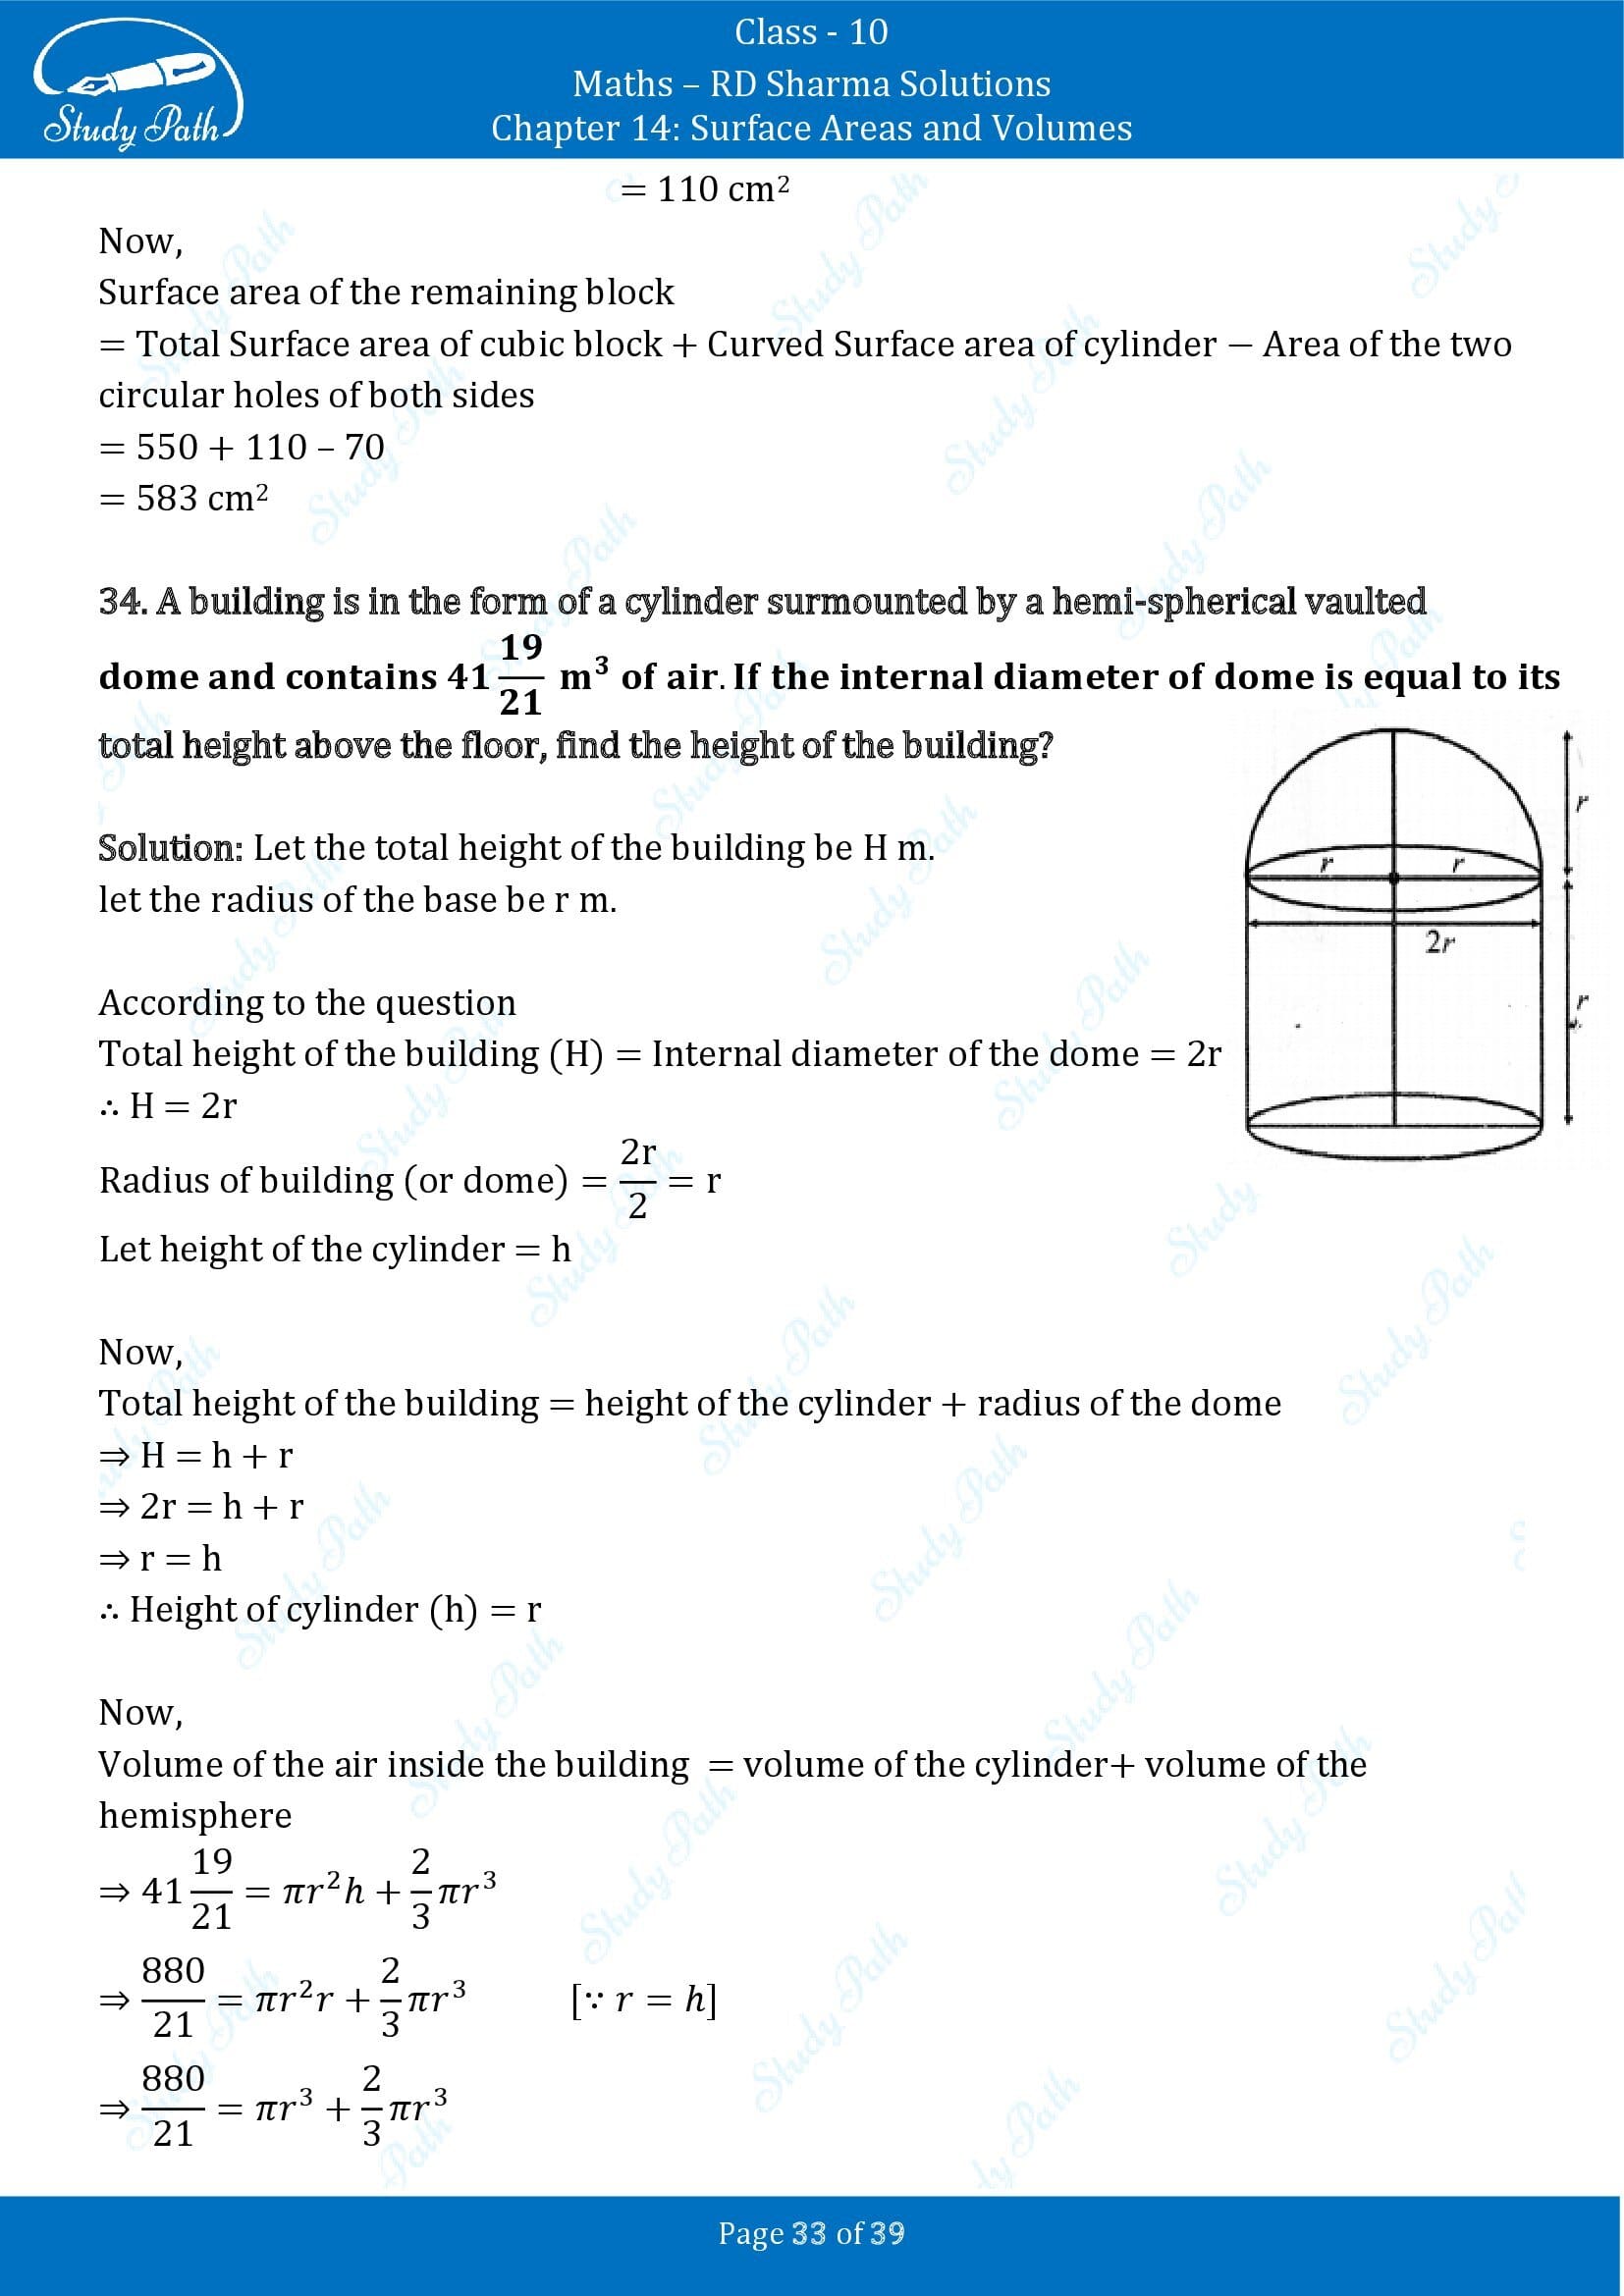 RD Sharma Solutions Class 10 Chapter 14 Surface Areas and Volumes Exercise 14.2 00033